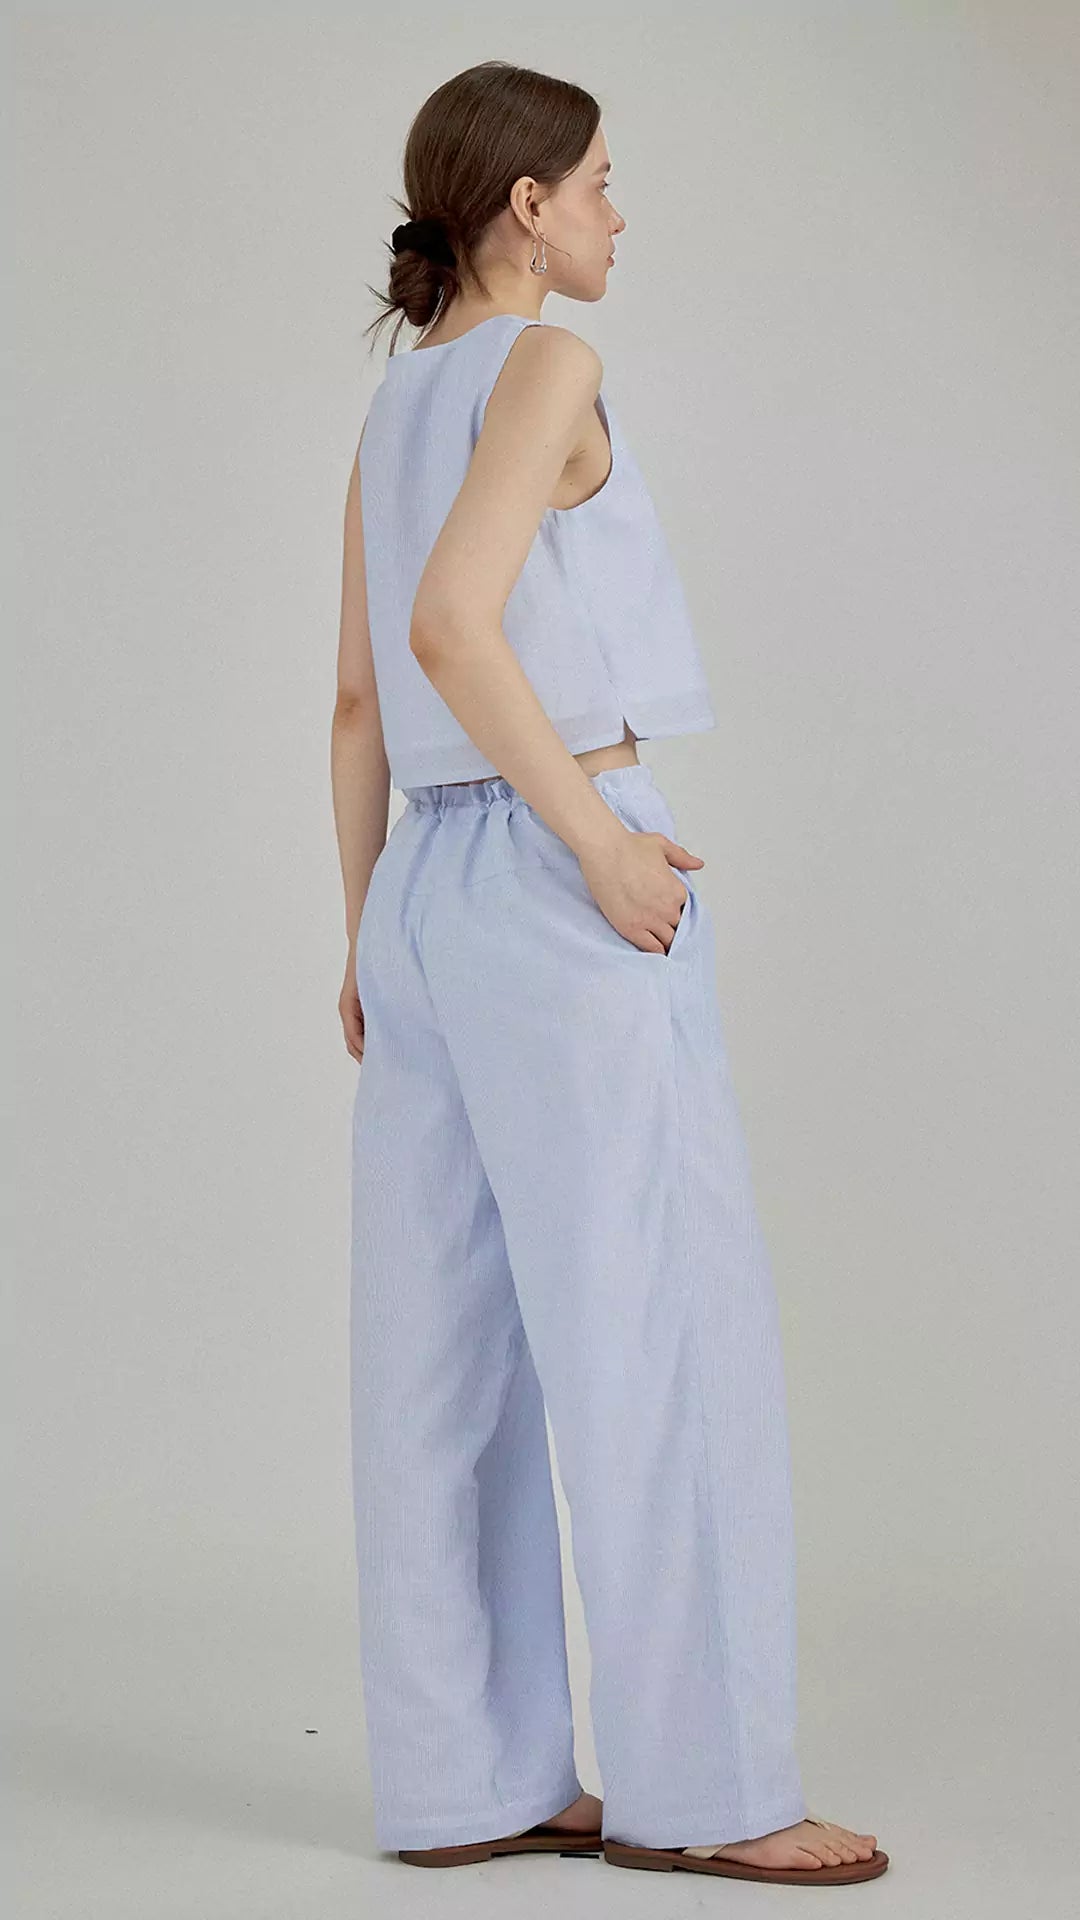 Linen Blue and White Striped Loungewear Set (Top and Pants)